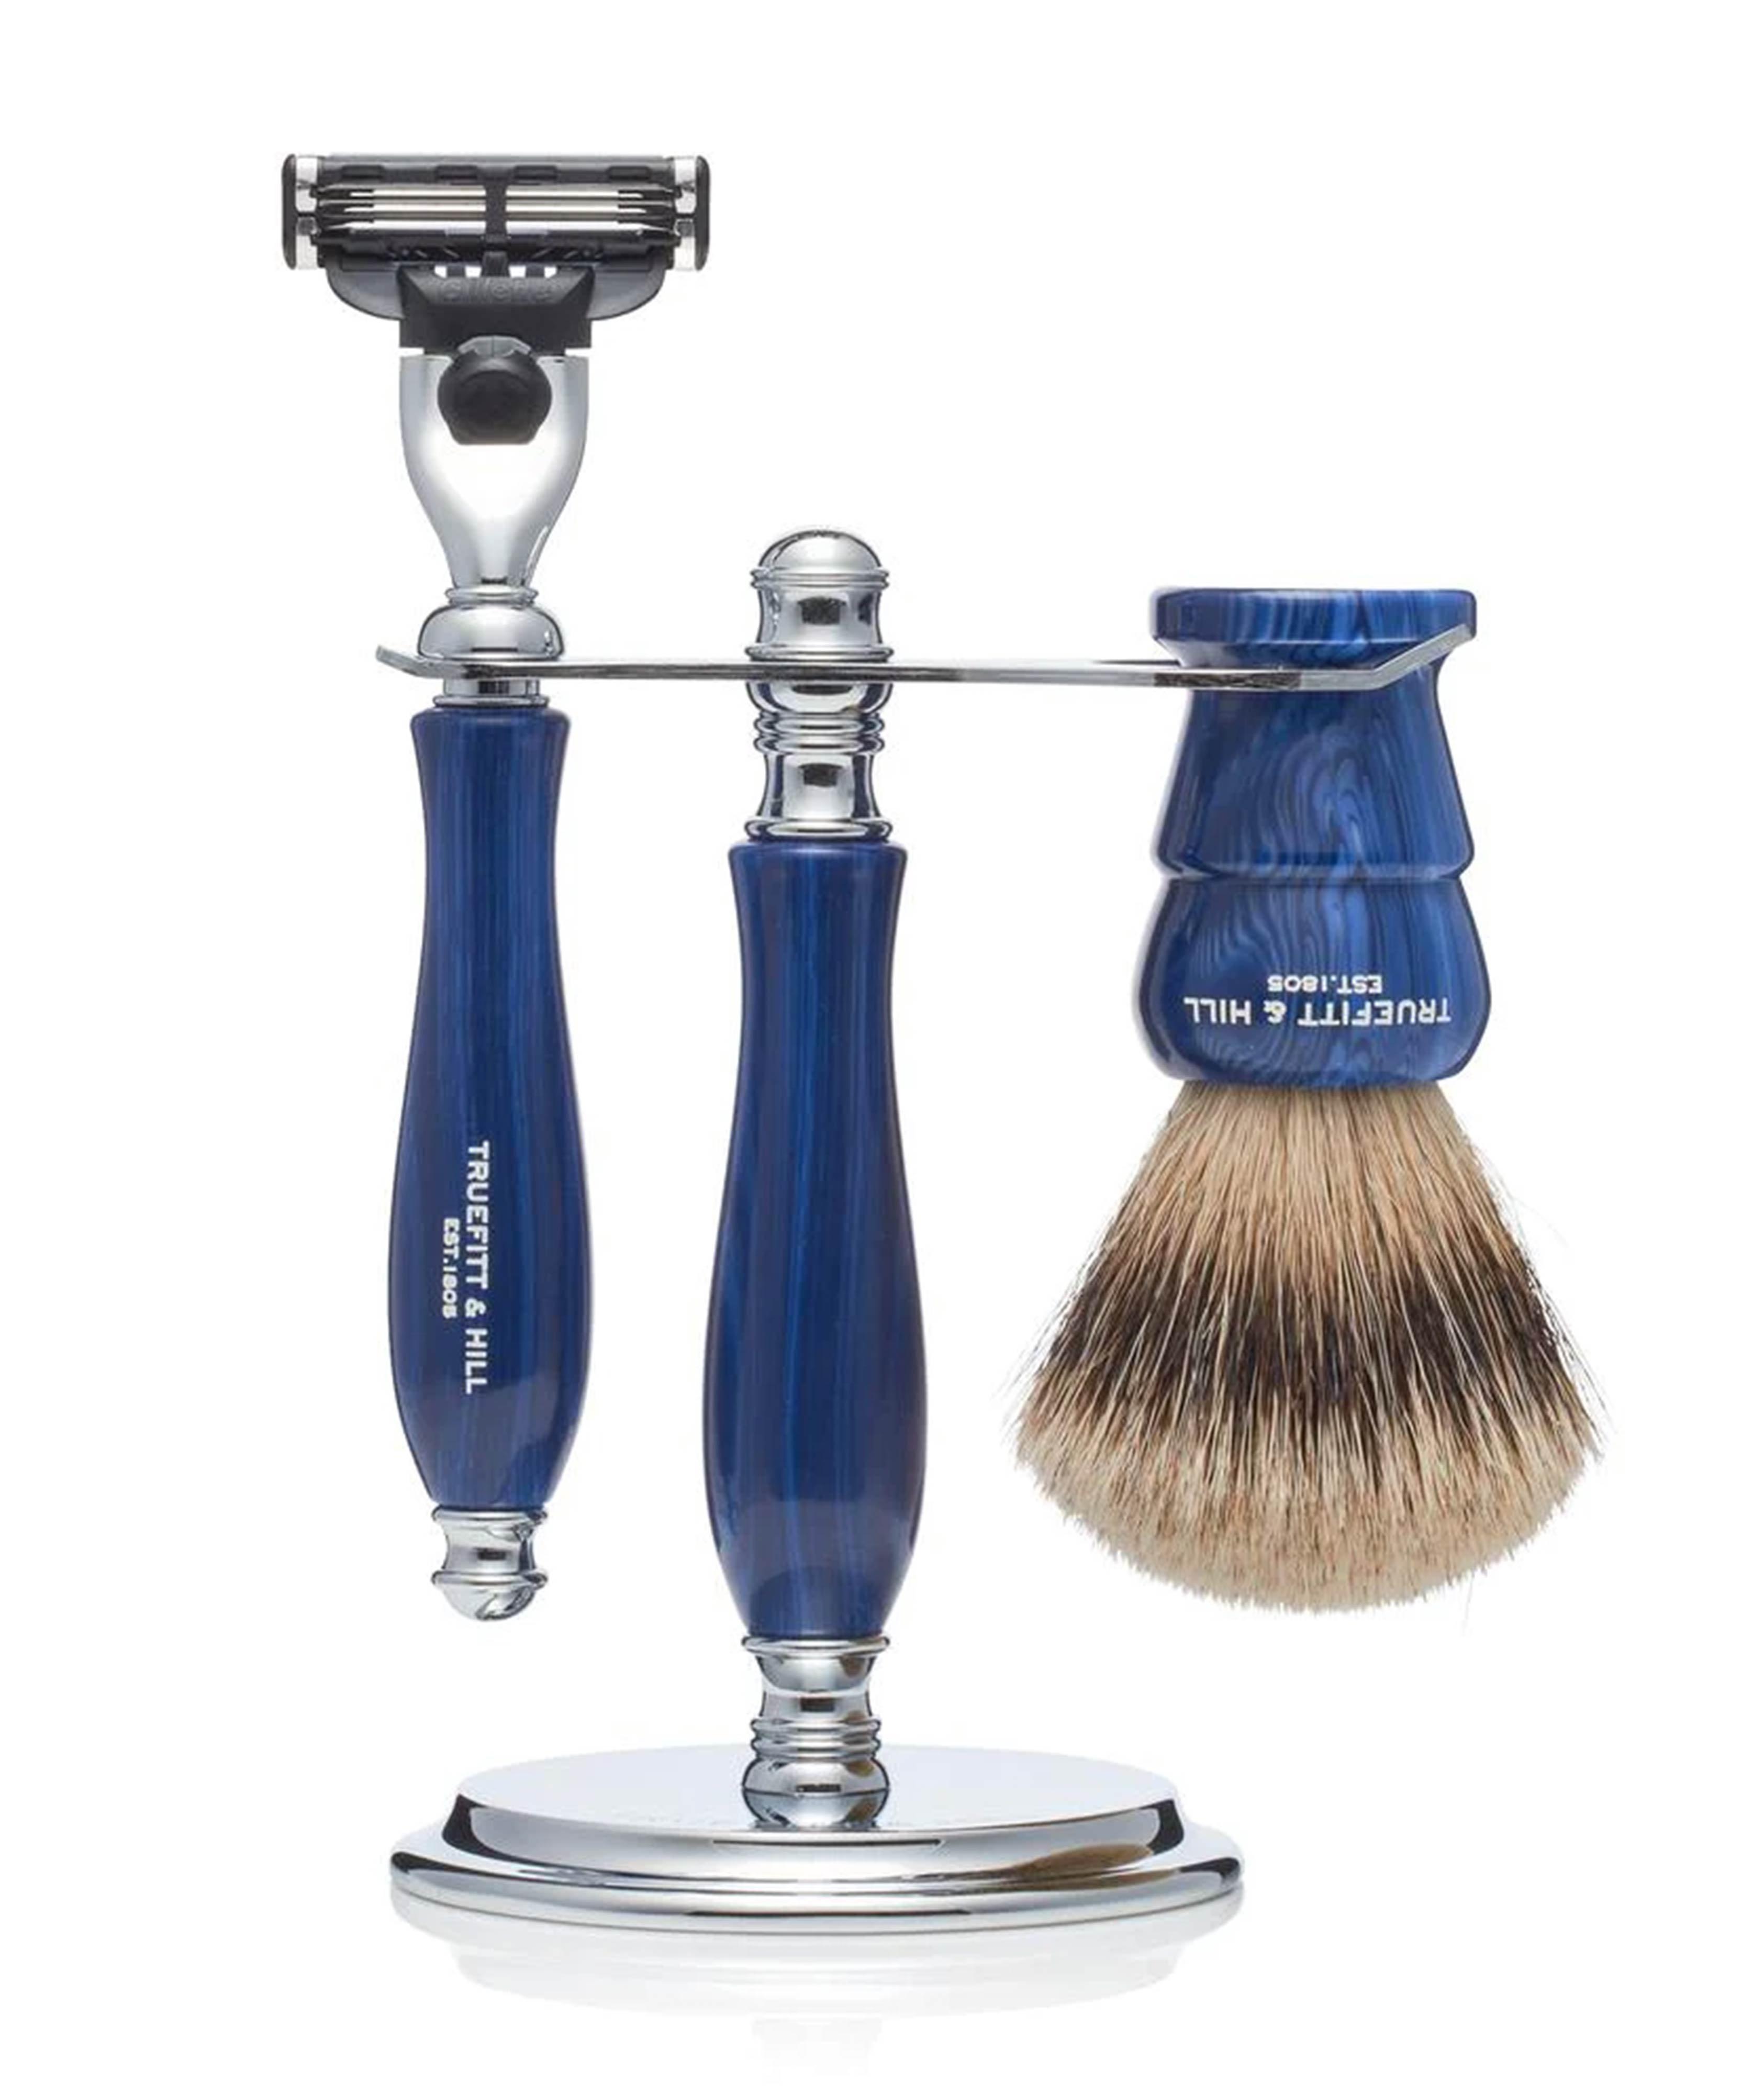 Jubilee Collection Faux Blue Opal: Silvertip Badger Brush/Mach Iii Razor/Stand image 0